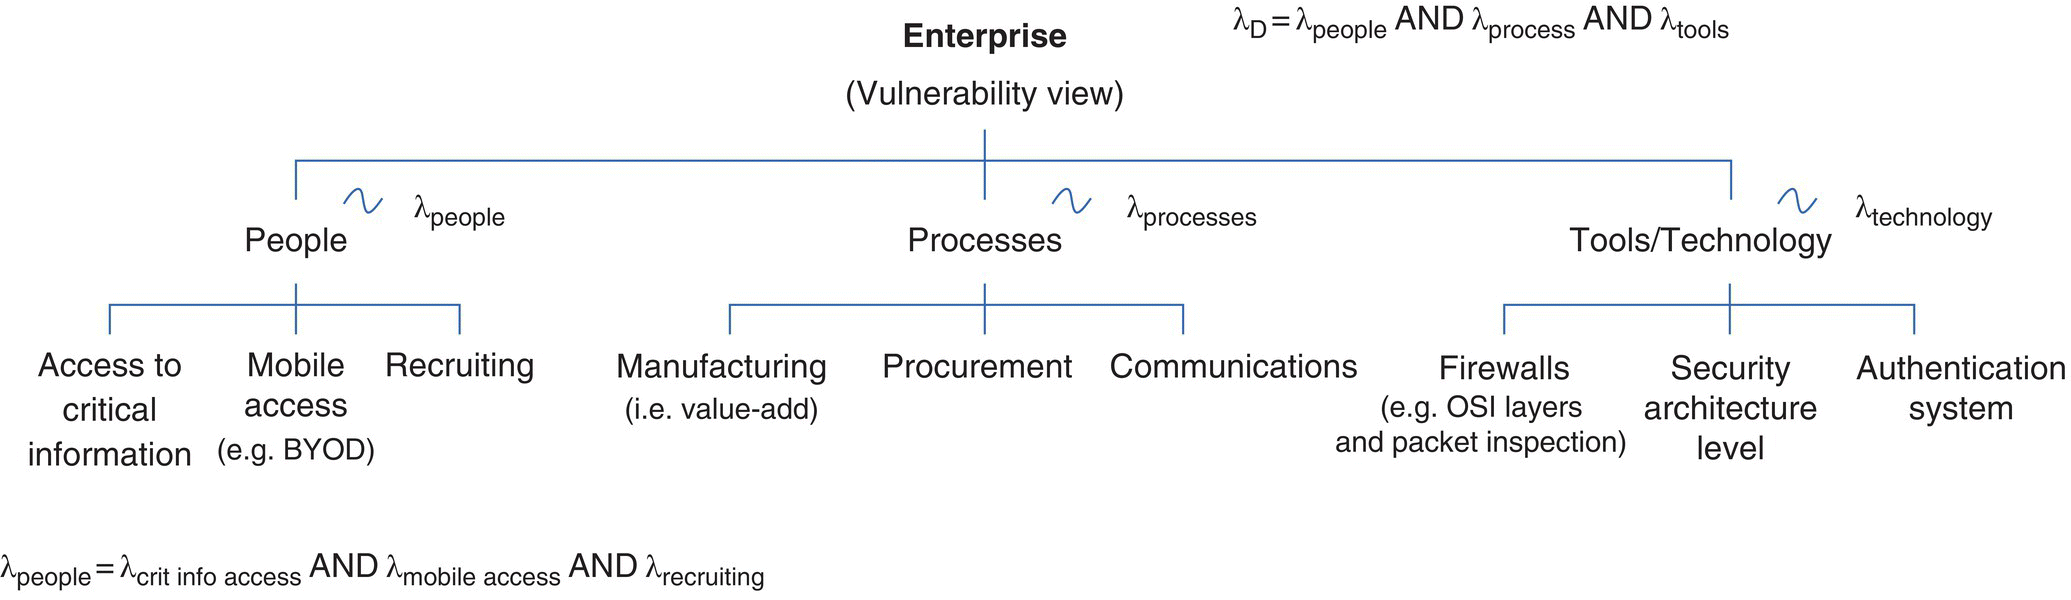 Tree diagram of enterprise vulnerability branches to people, processes, and tools/technology, which further branches to mobile access, recruiting, manufacturing, firewalls, authentication system, etc.